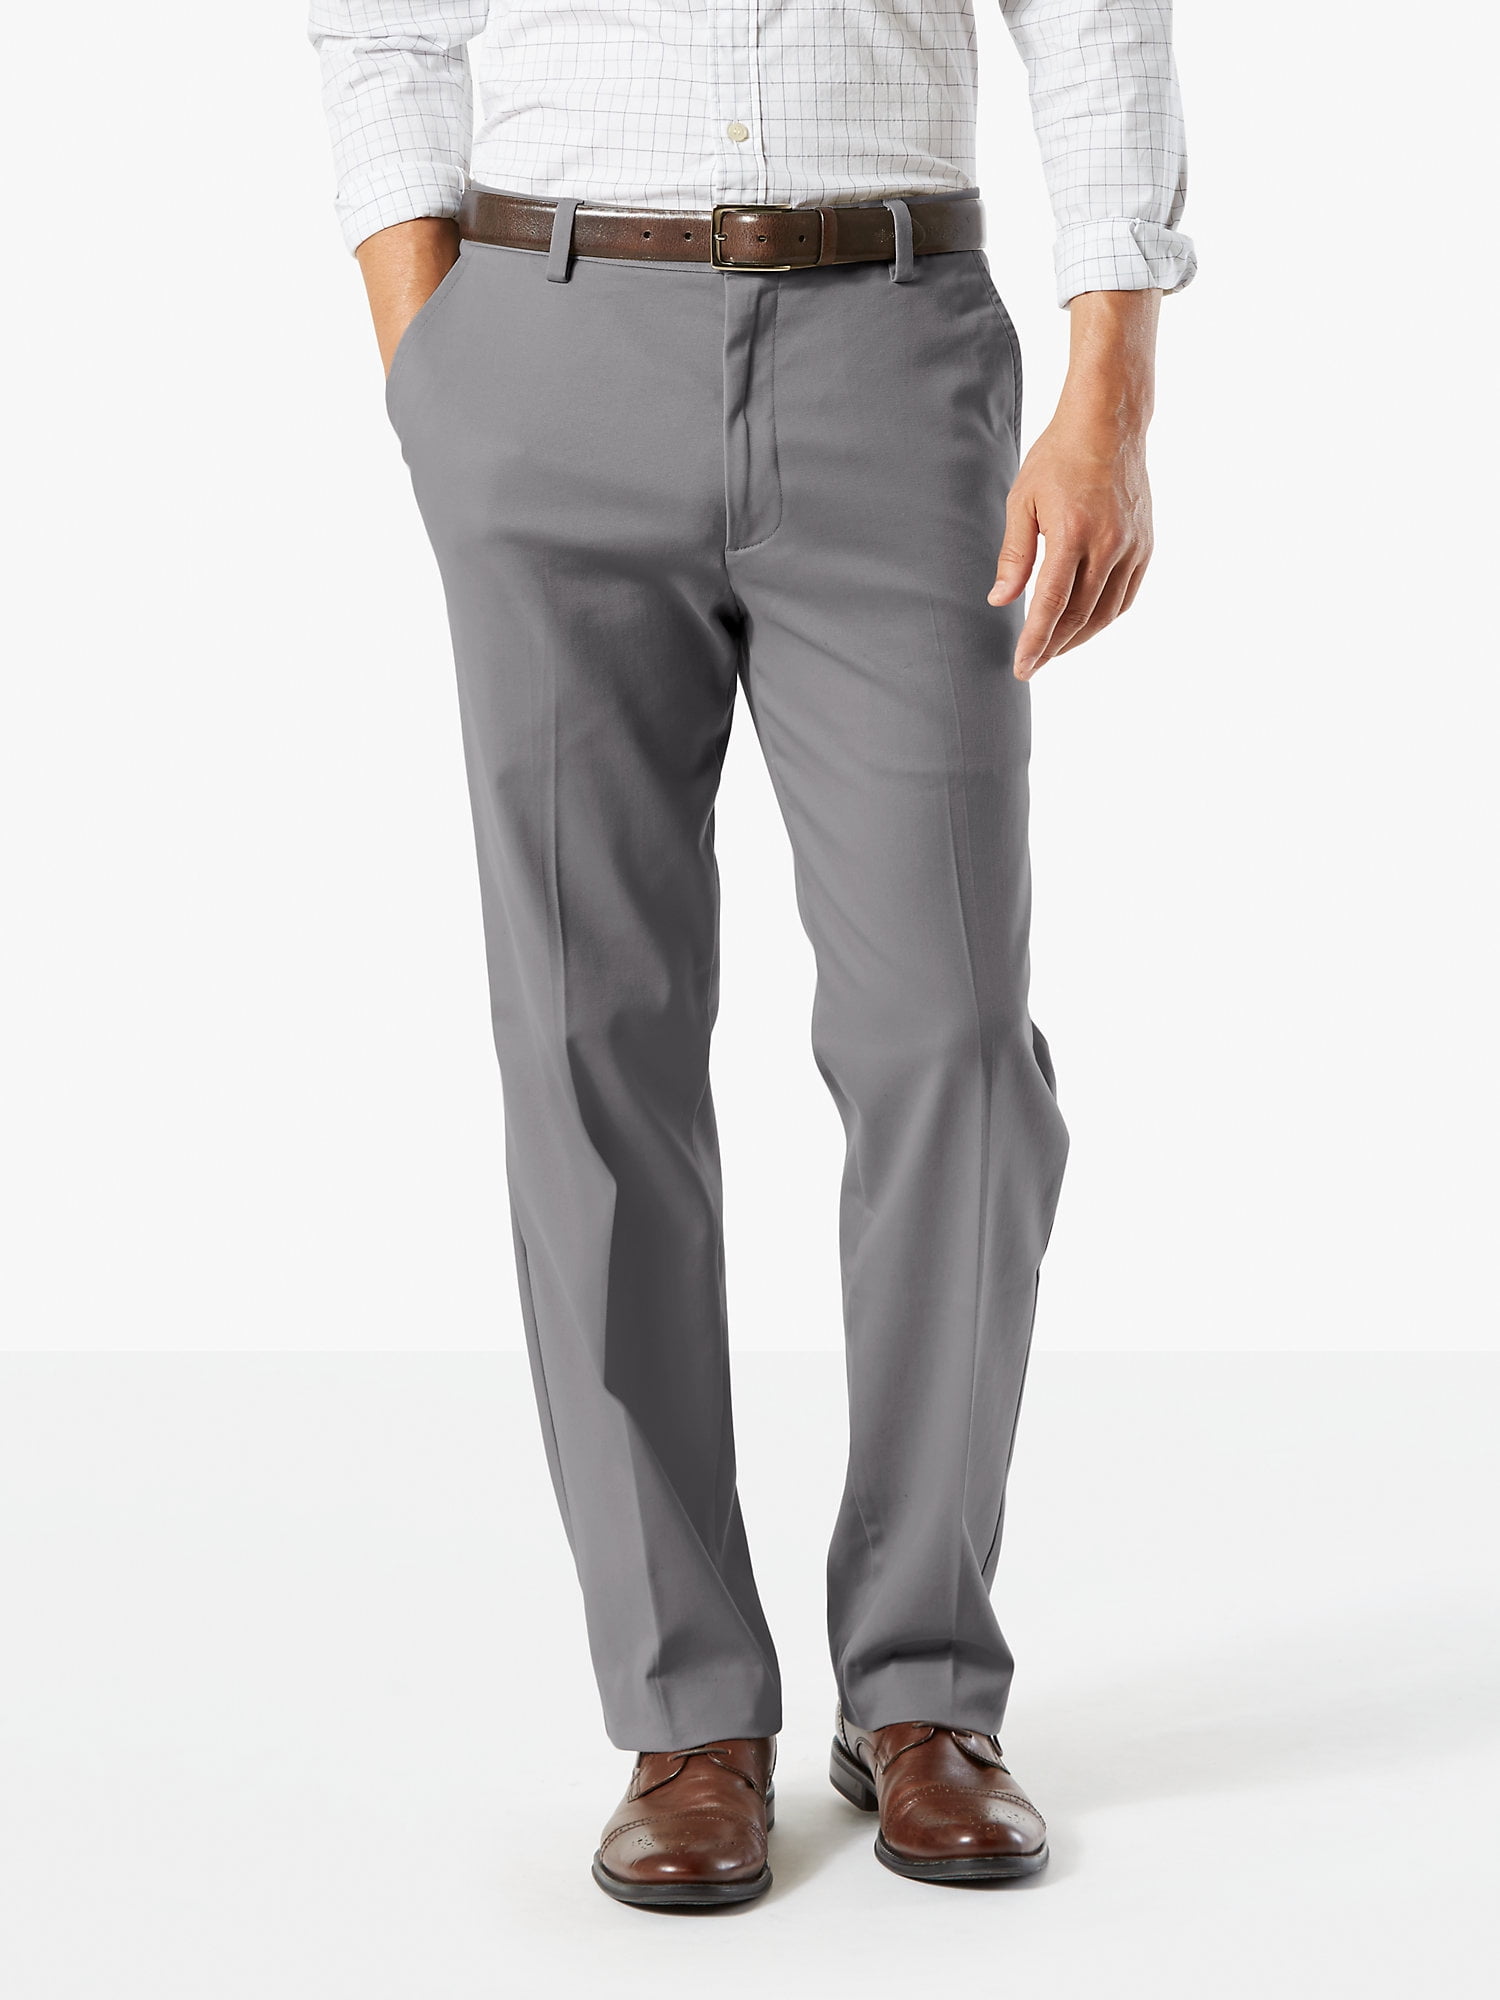 Dockers Men's Classic Flat Front Easy Khaki Pant with Stretch